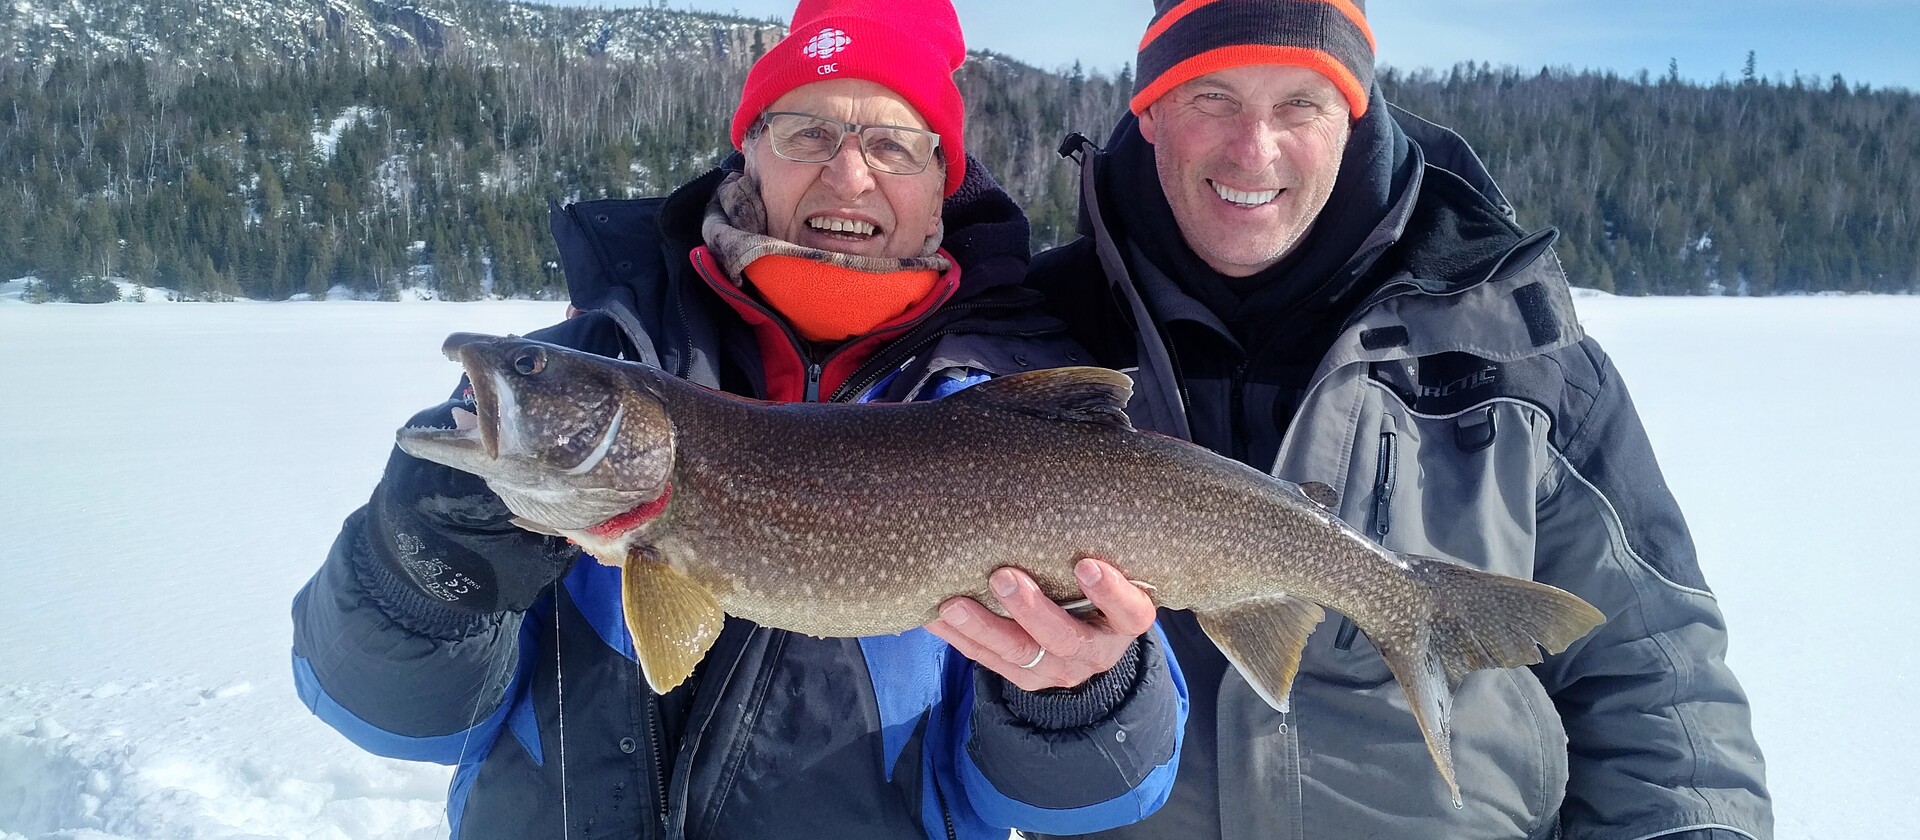 Why use a spinning reel for ice fishing… well, many reasons